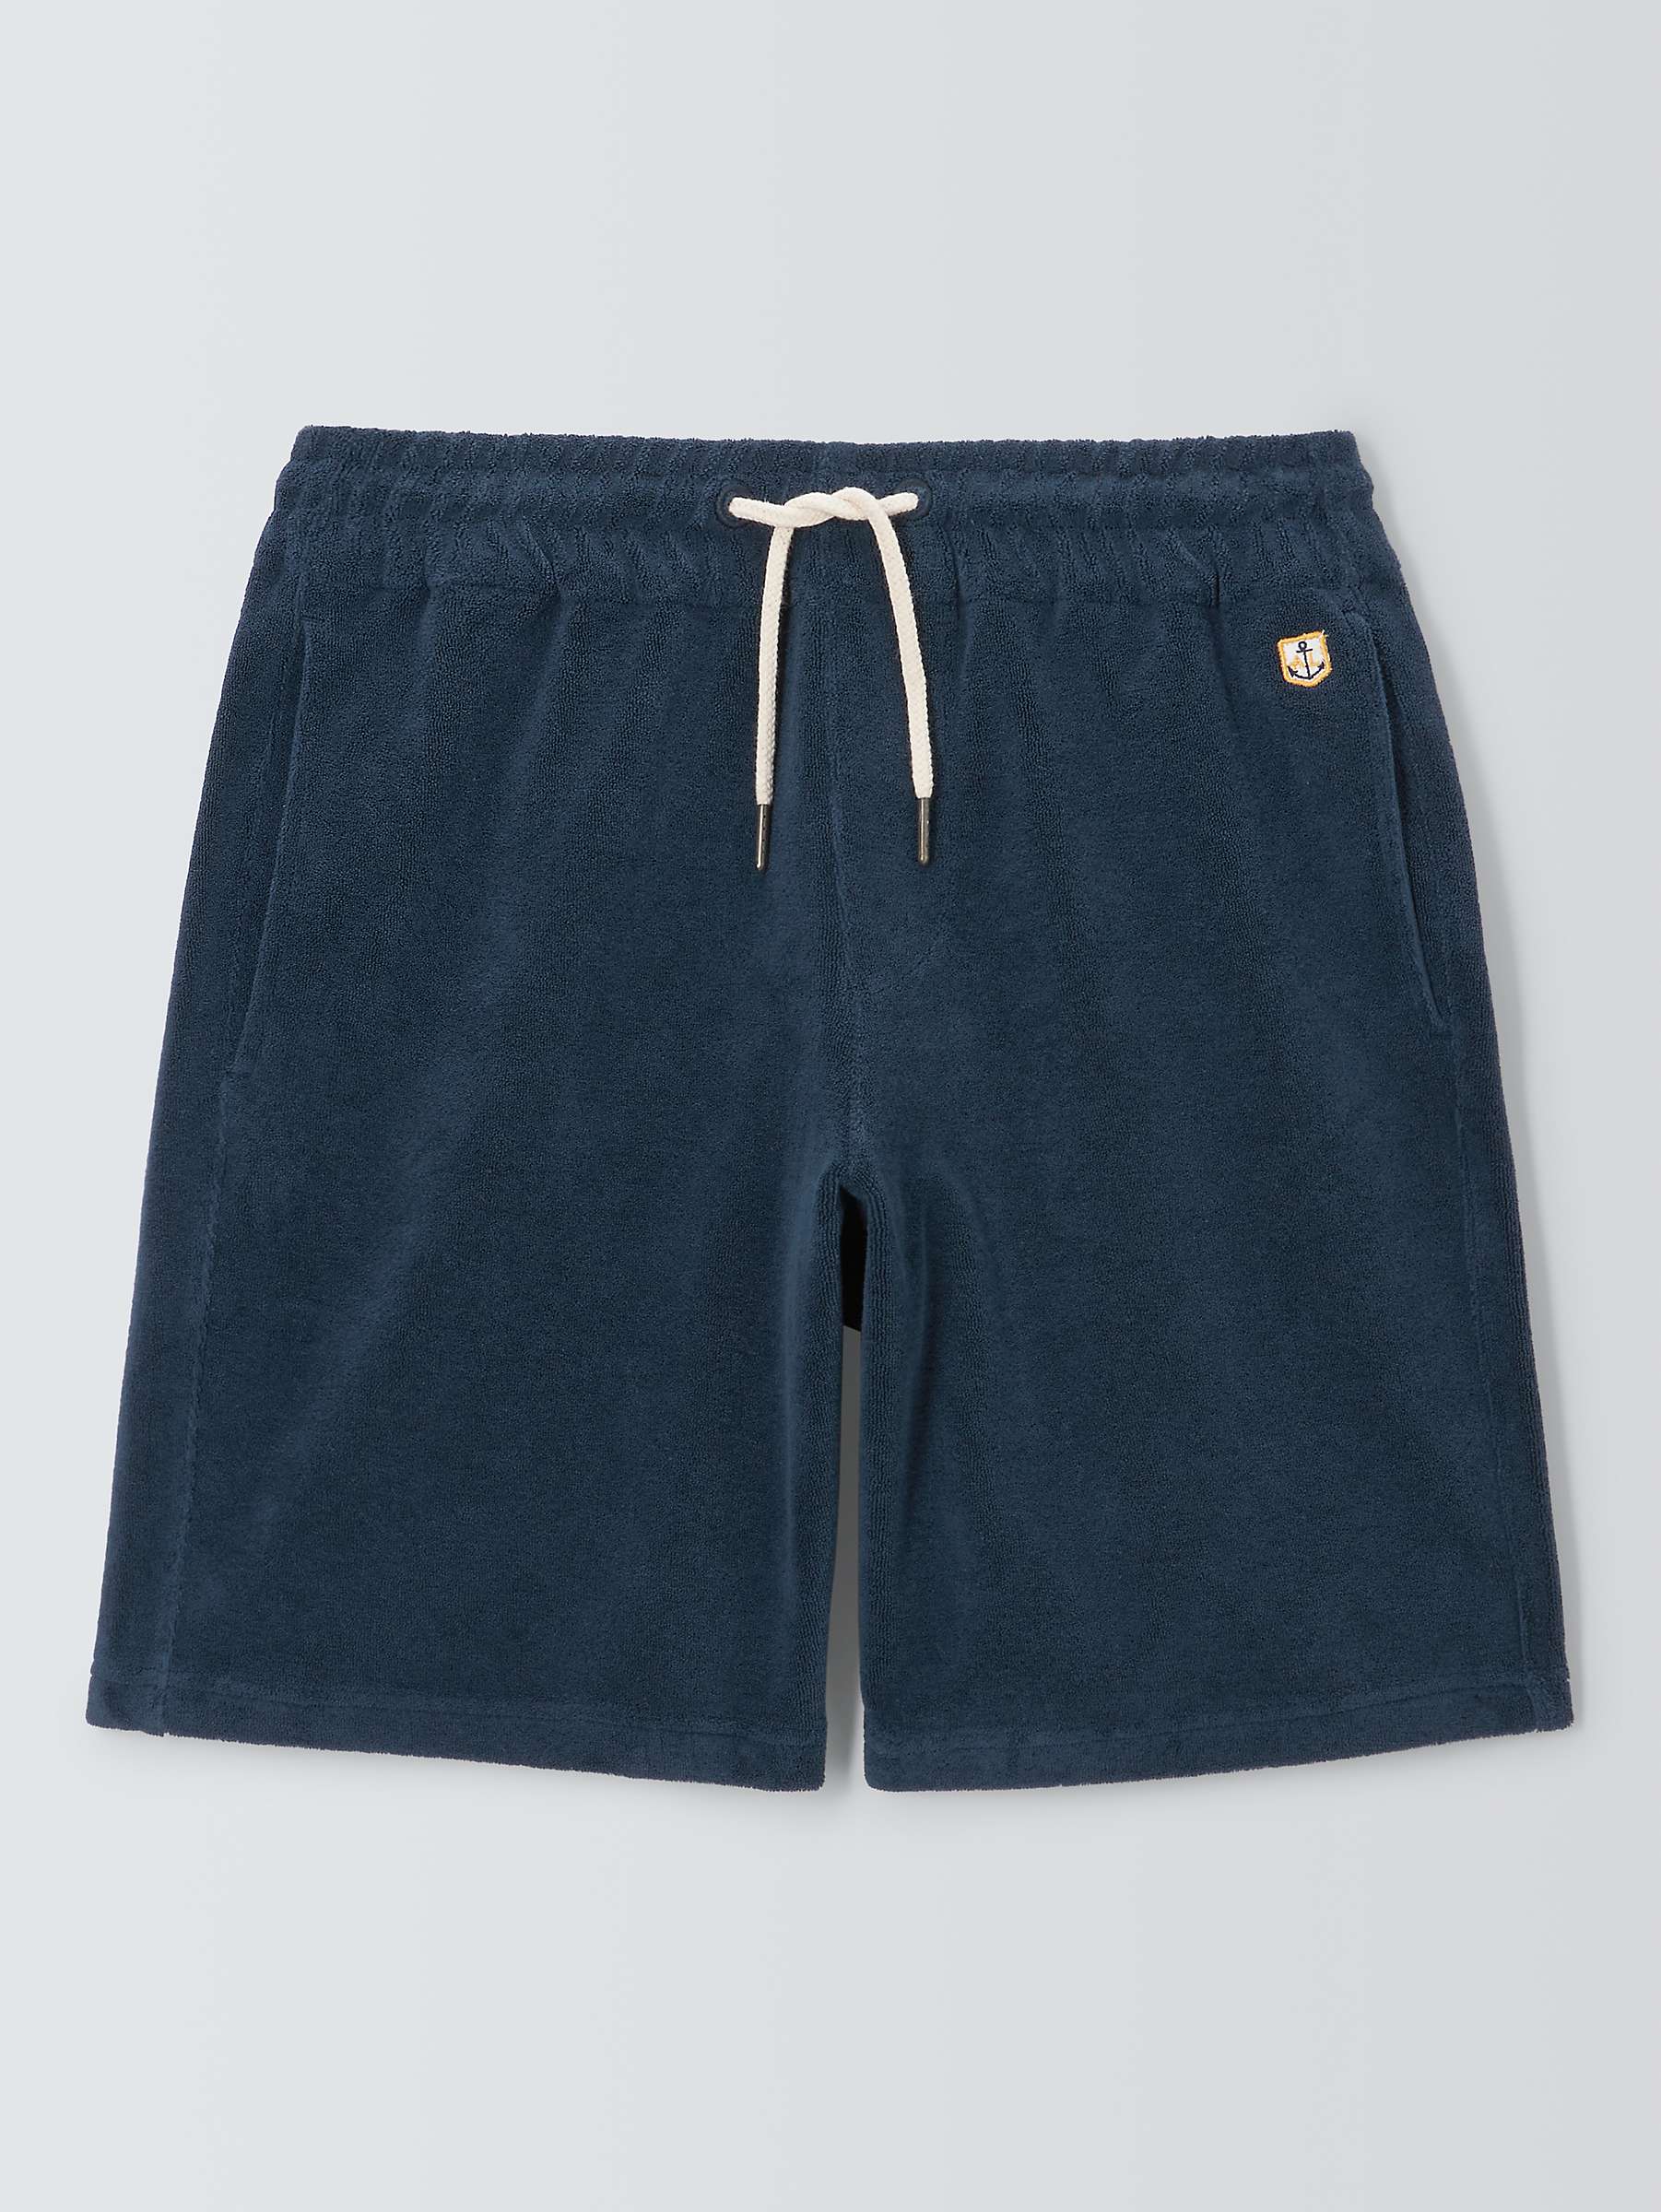 Buy Armor Lux Comfy Terry Heritage Shorts, Navy Online at johnlewis.com